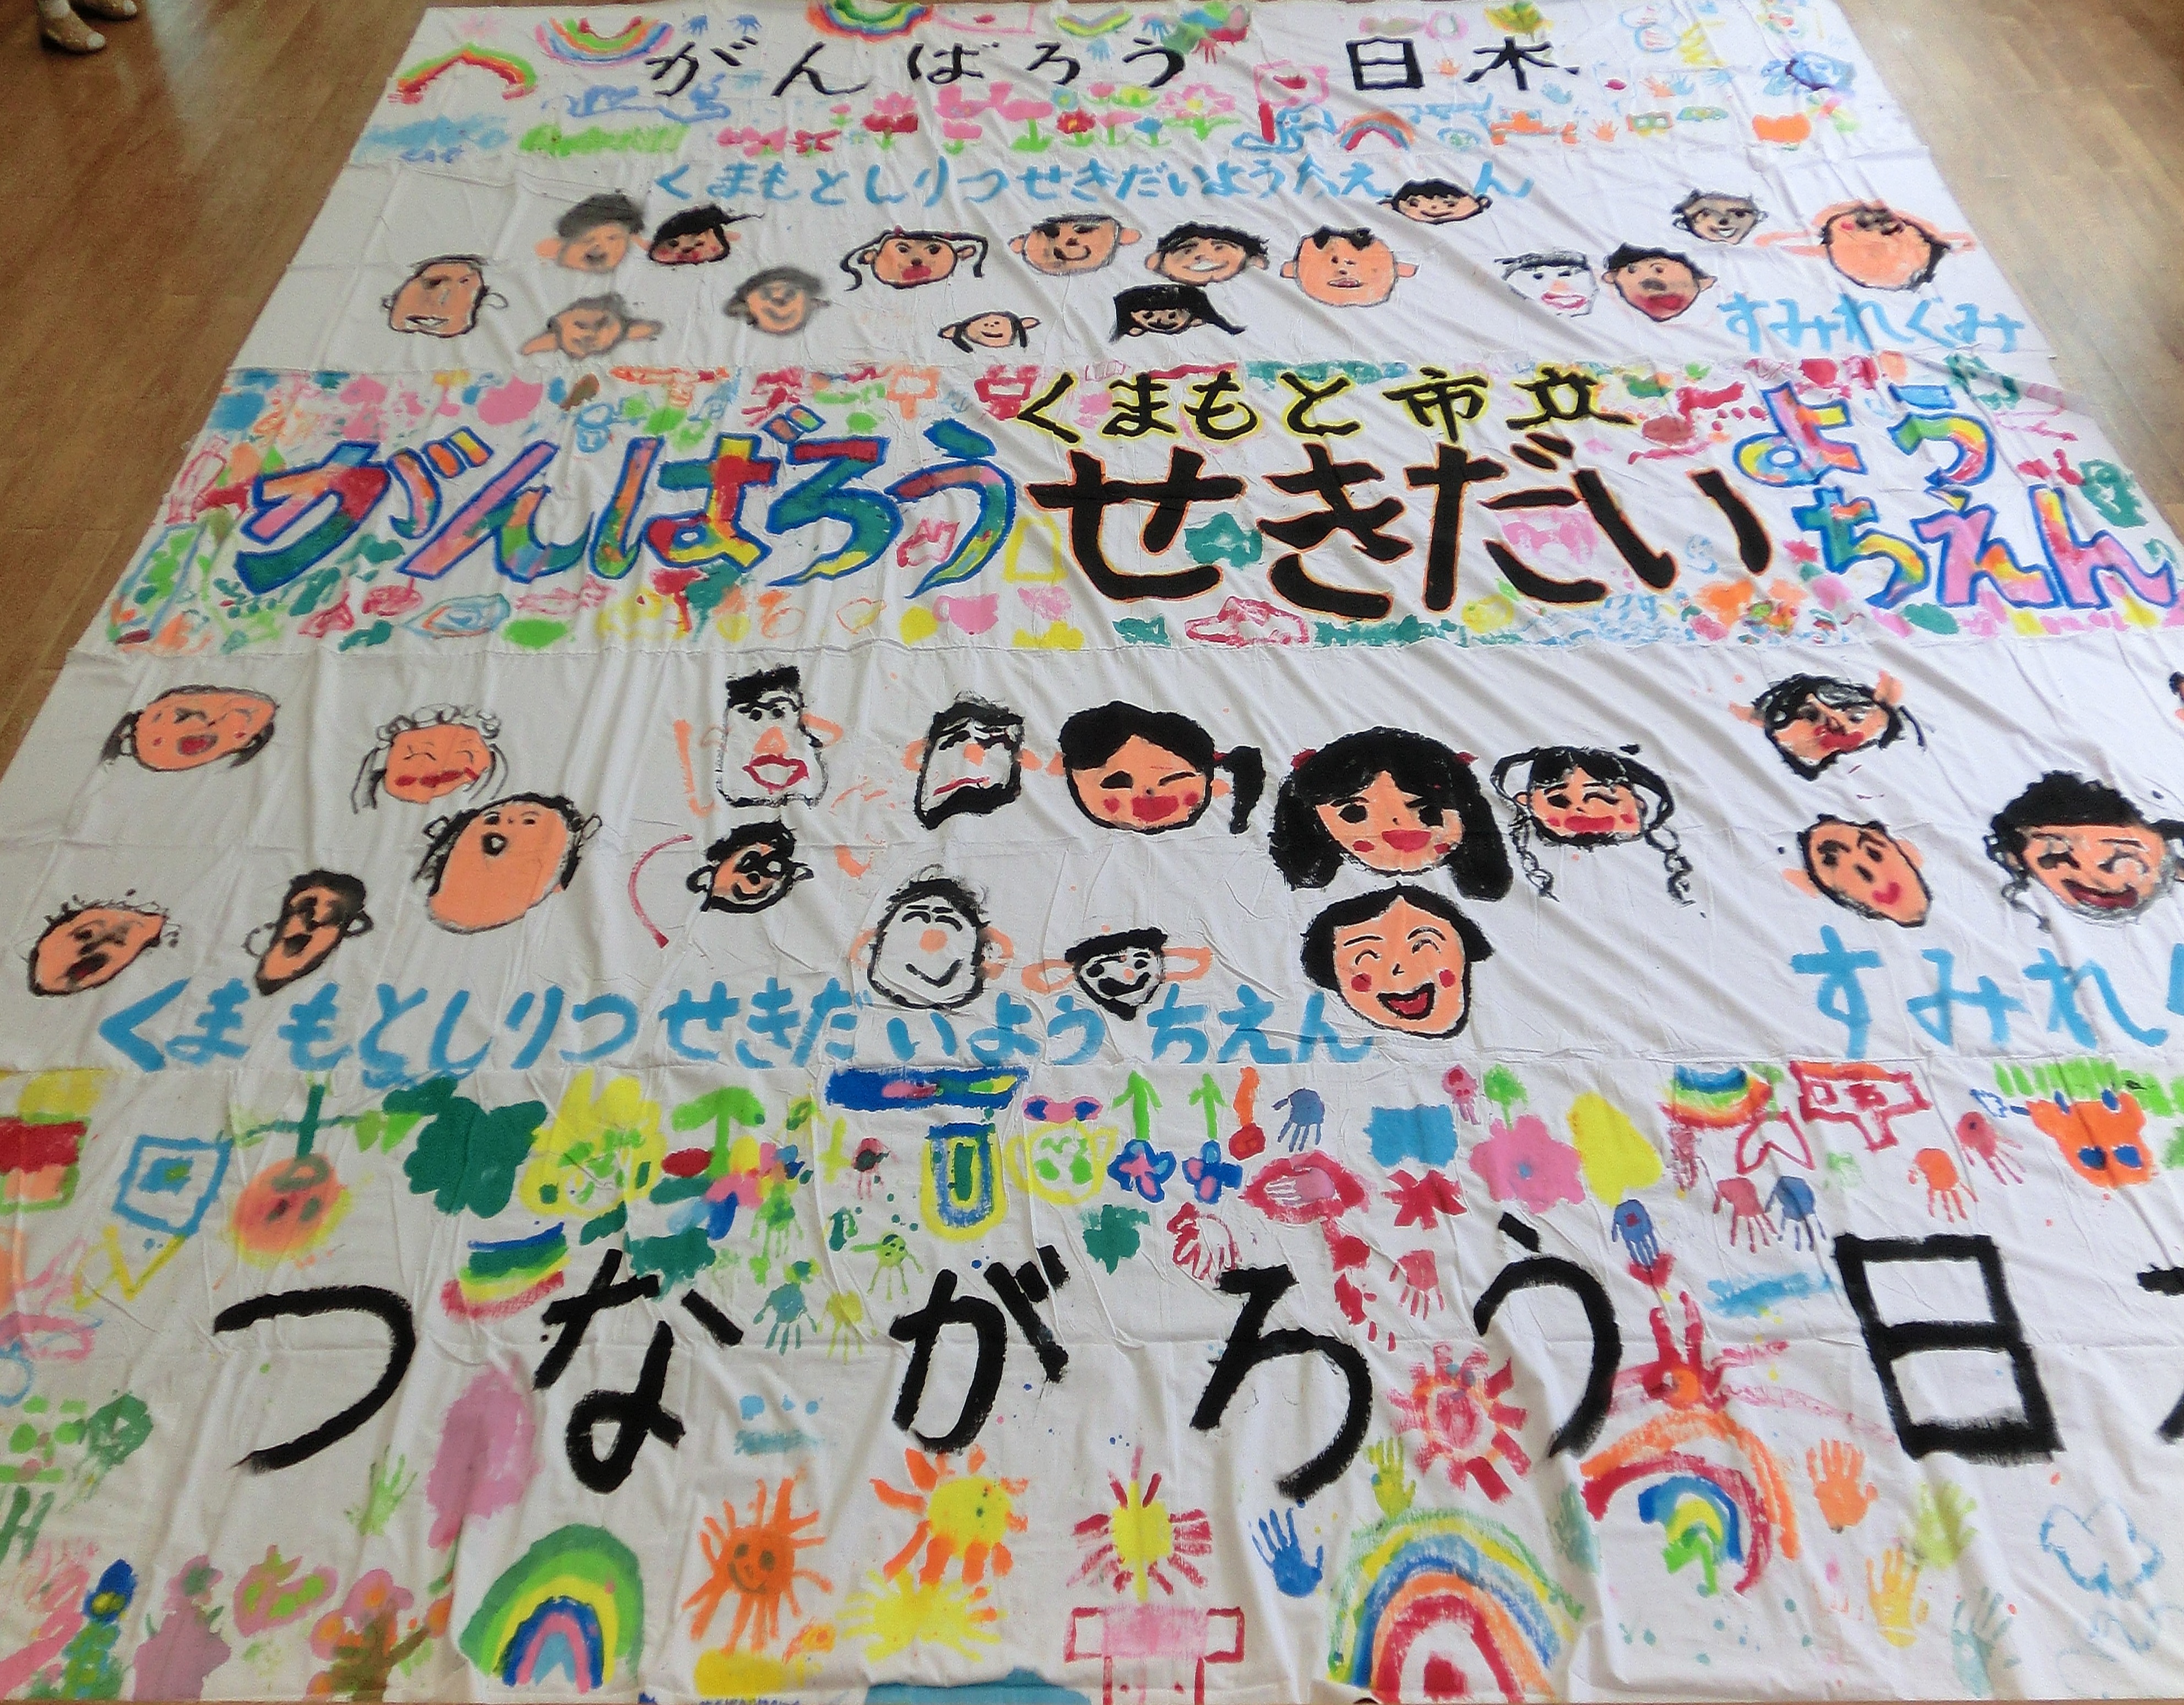 Created “The Biggest Painting in the World 2012 Paintings from Every Prefecture in Japan, in Kumamoto city”.